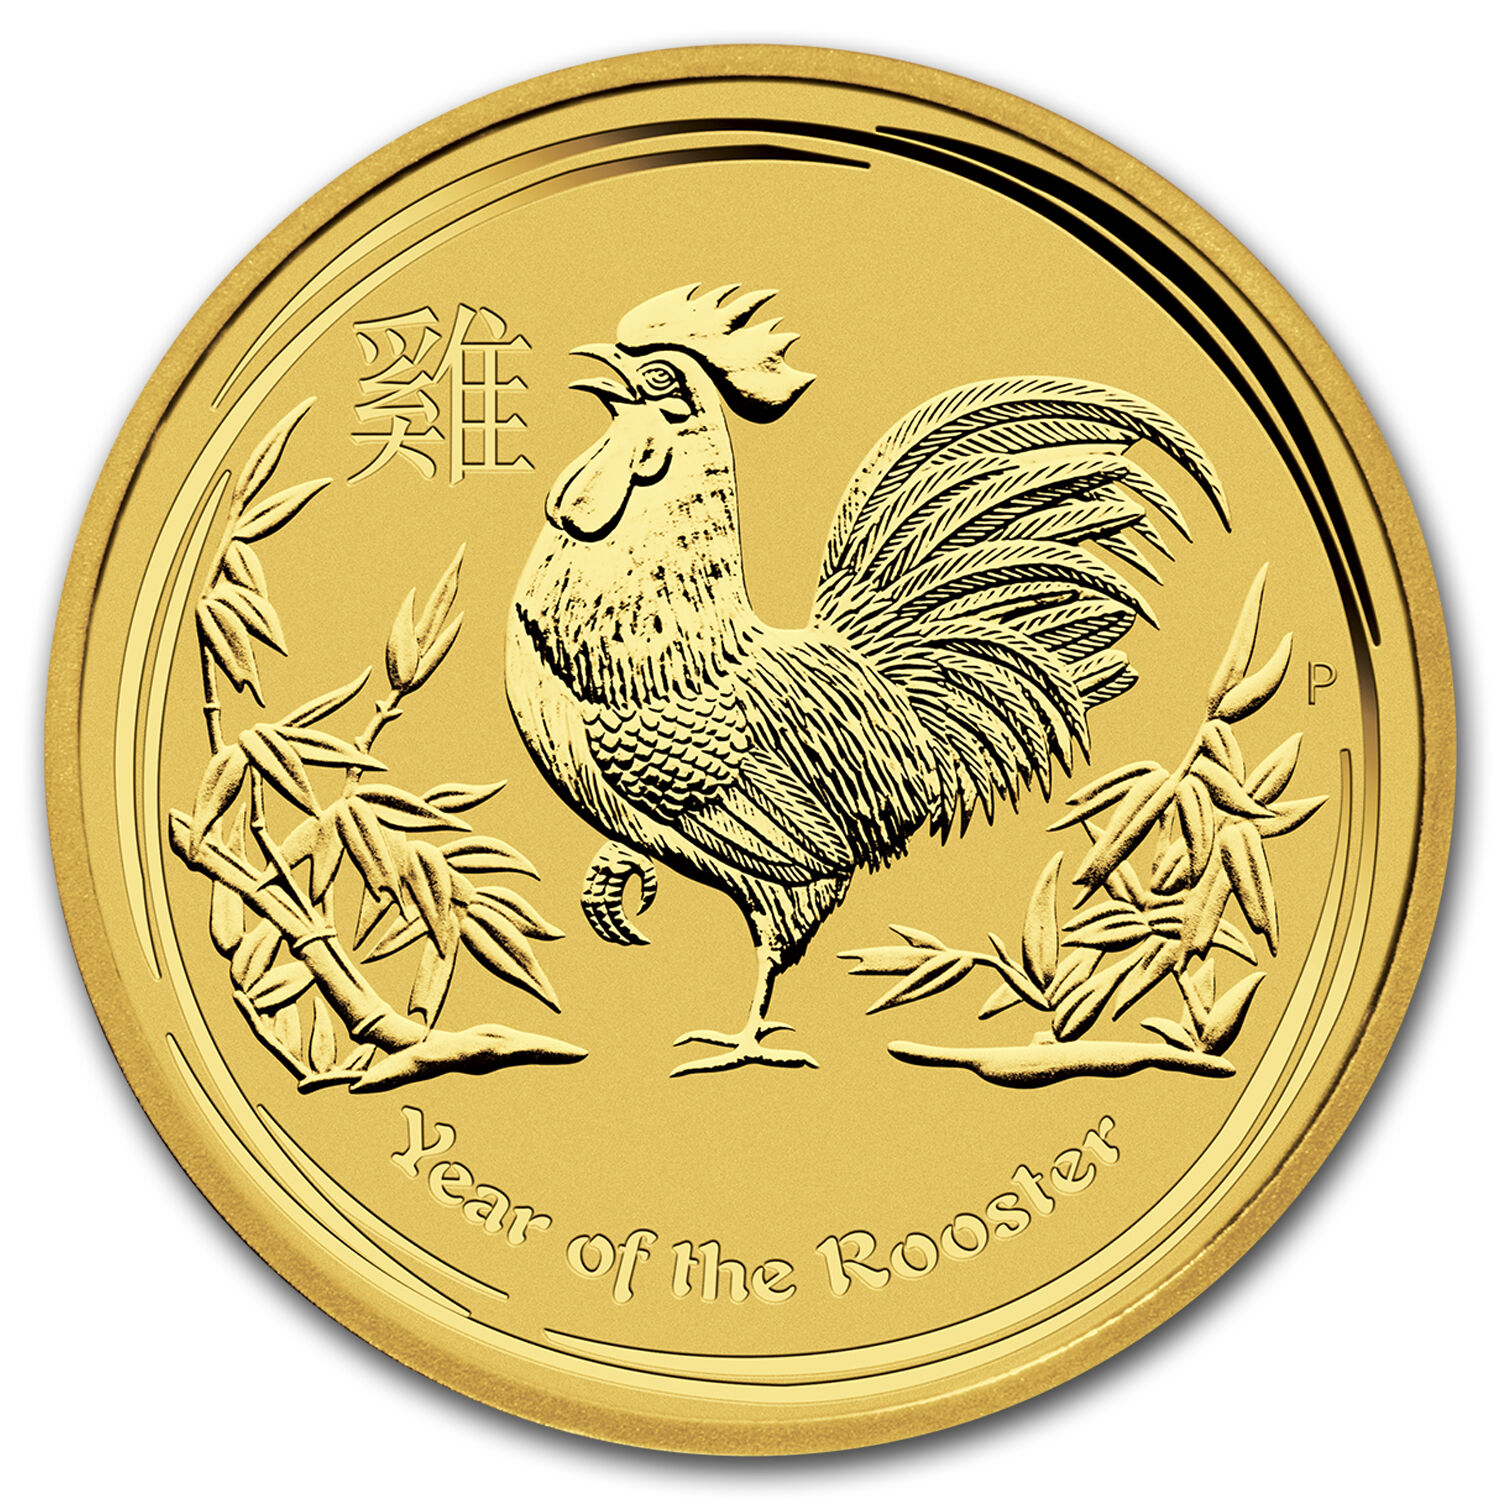 2017 1 oz Gold Lunar Year of the Rooster Perth Mint BU - SKU #102651